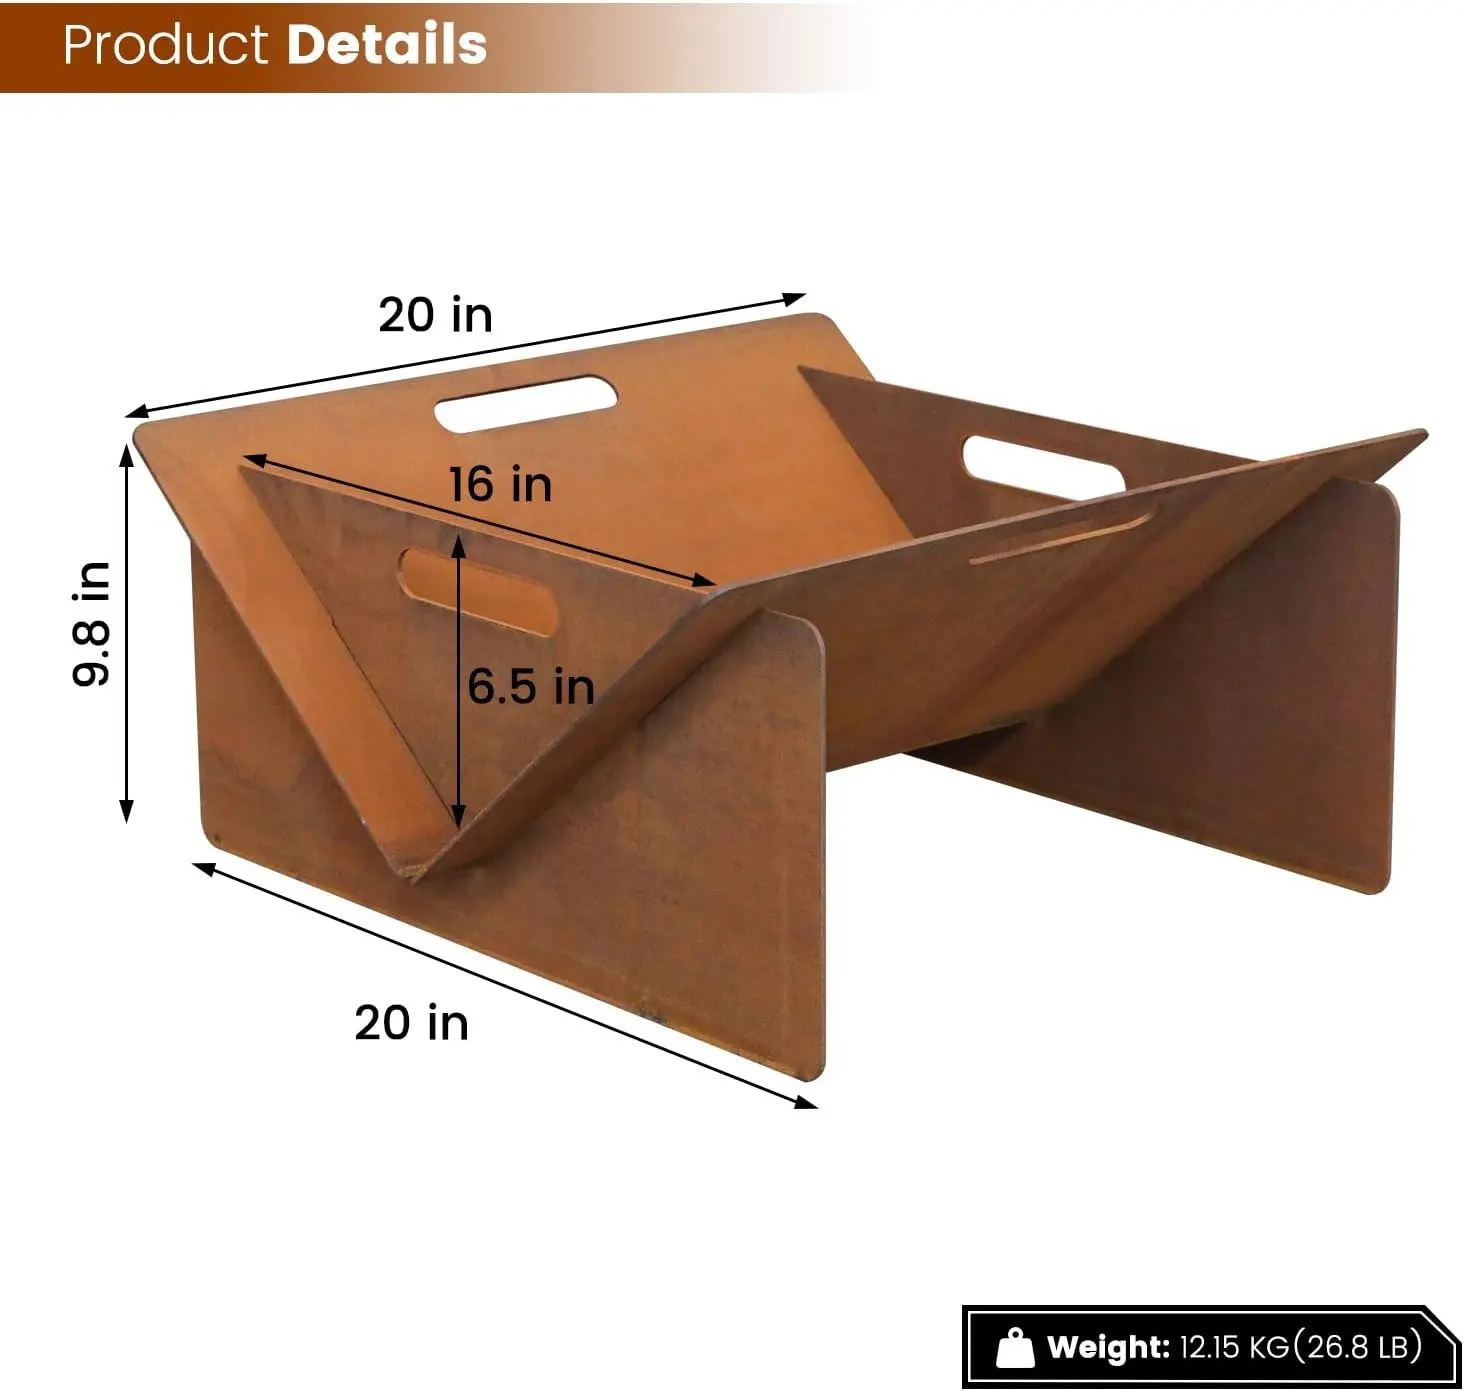 Corten Steel Portable fire pit rusty finish outdoor wood burning fire pit